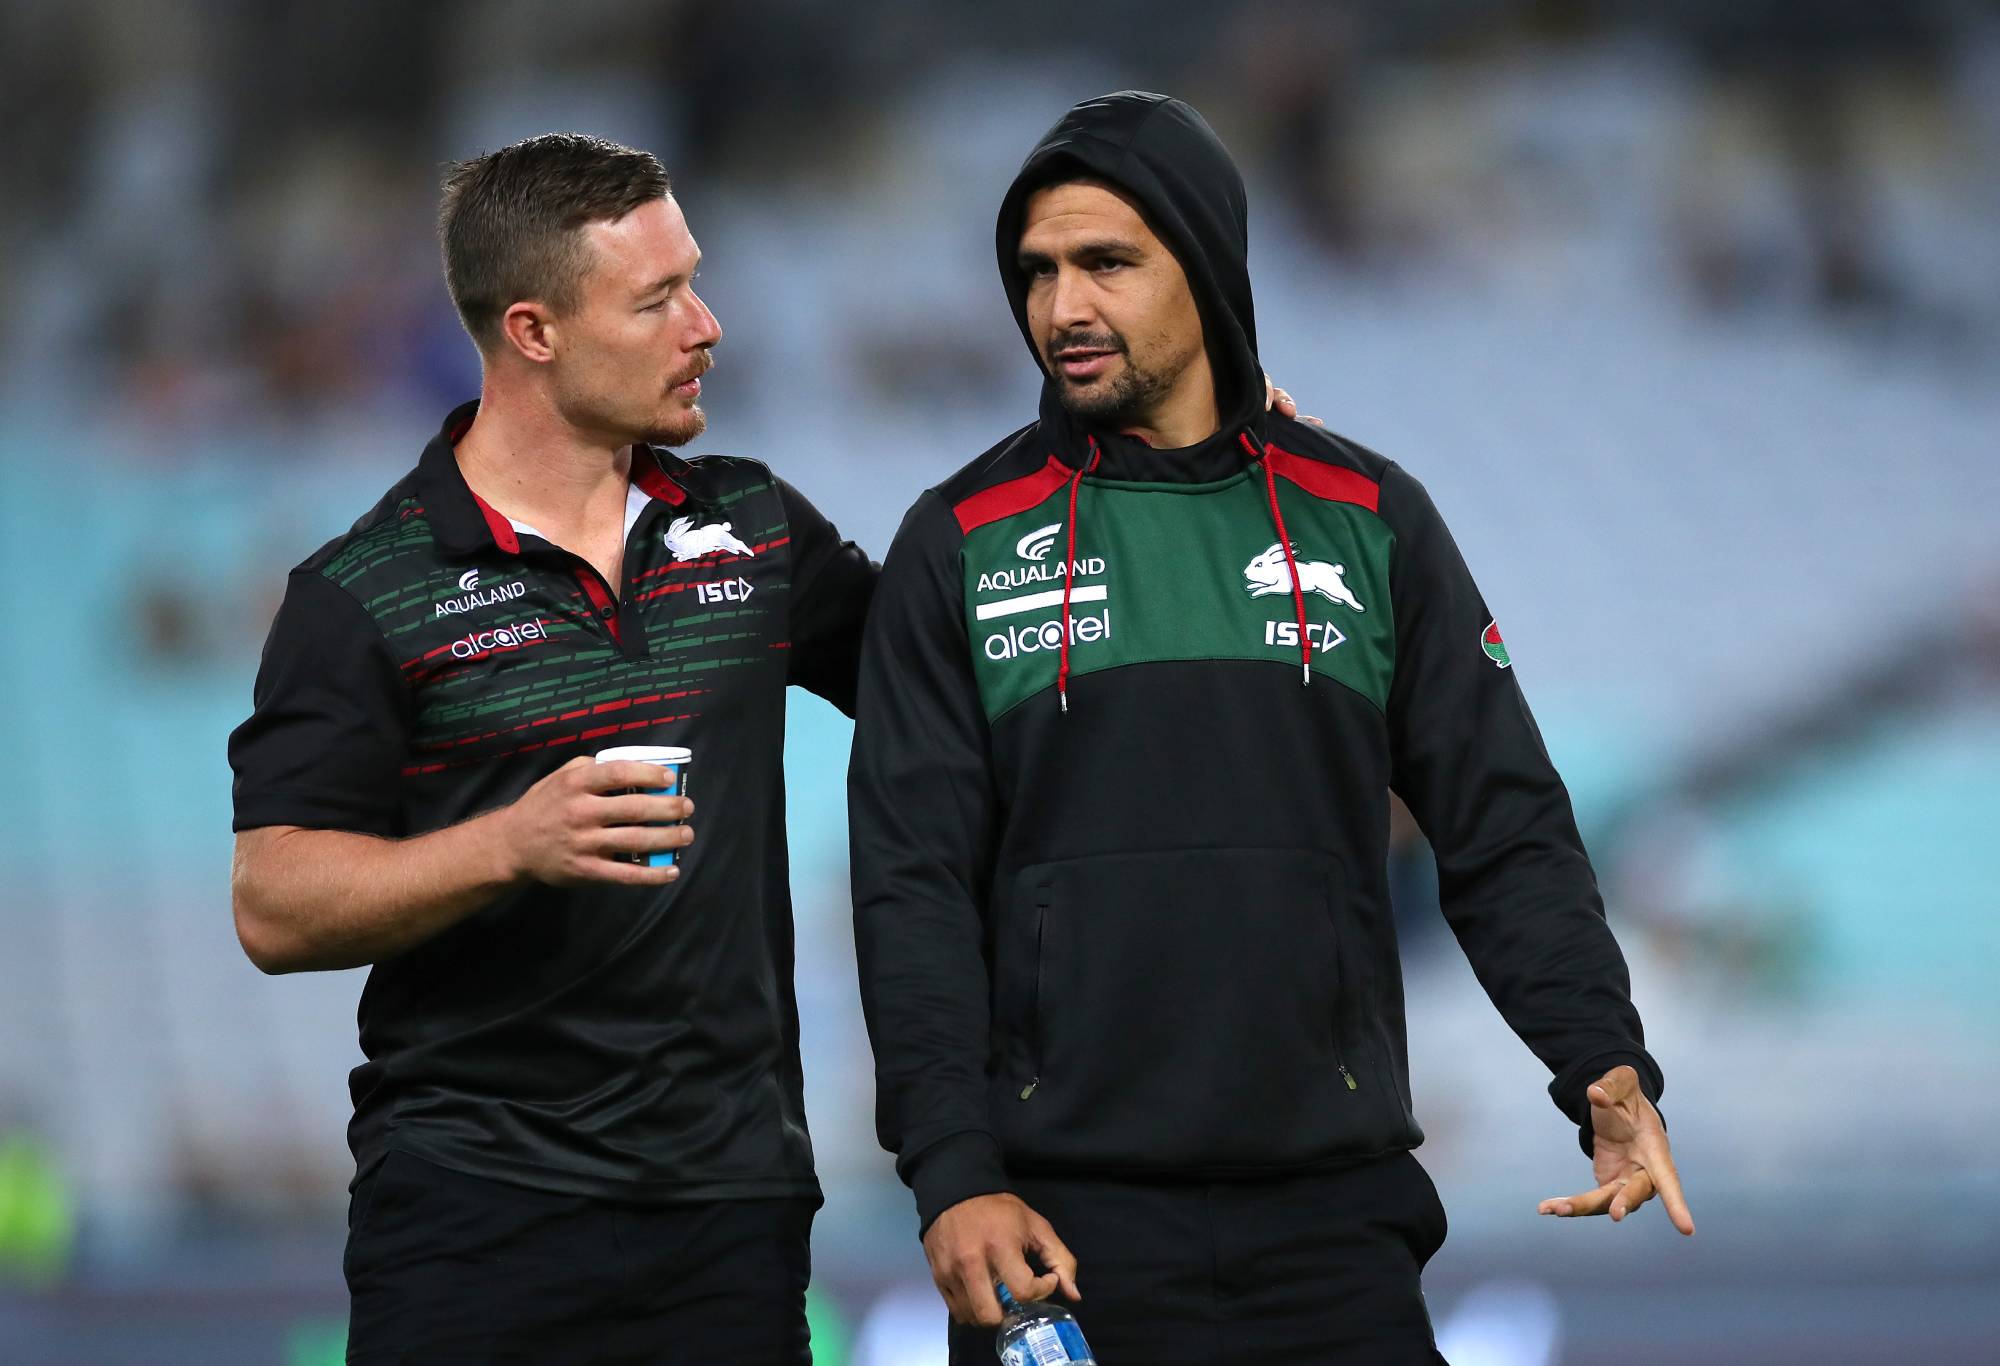 SYDNEY, AUSTRALIA - MAY 02: (L-R) Damien Cook of the Rabbitohs and Cody Walker of the Rabbitohs talk before the round eight NRL match between the South Sydney Rabbitohs and the Brisbane Broncos at ANZ Stadium on May 02, 2019 in Sydney, Australia. (Photo by Cameron Spencer/Getty Images)